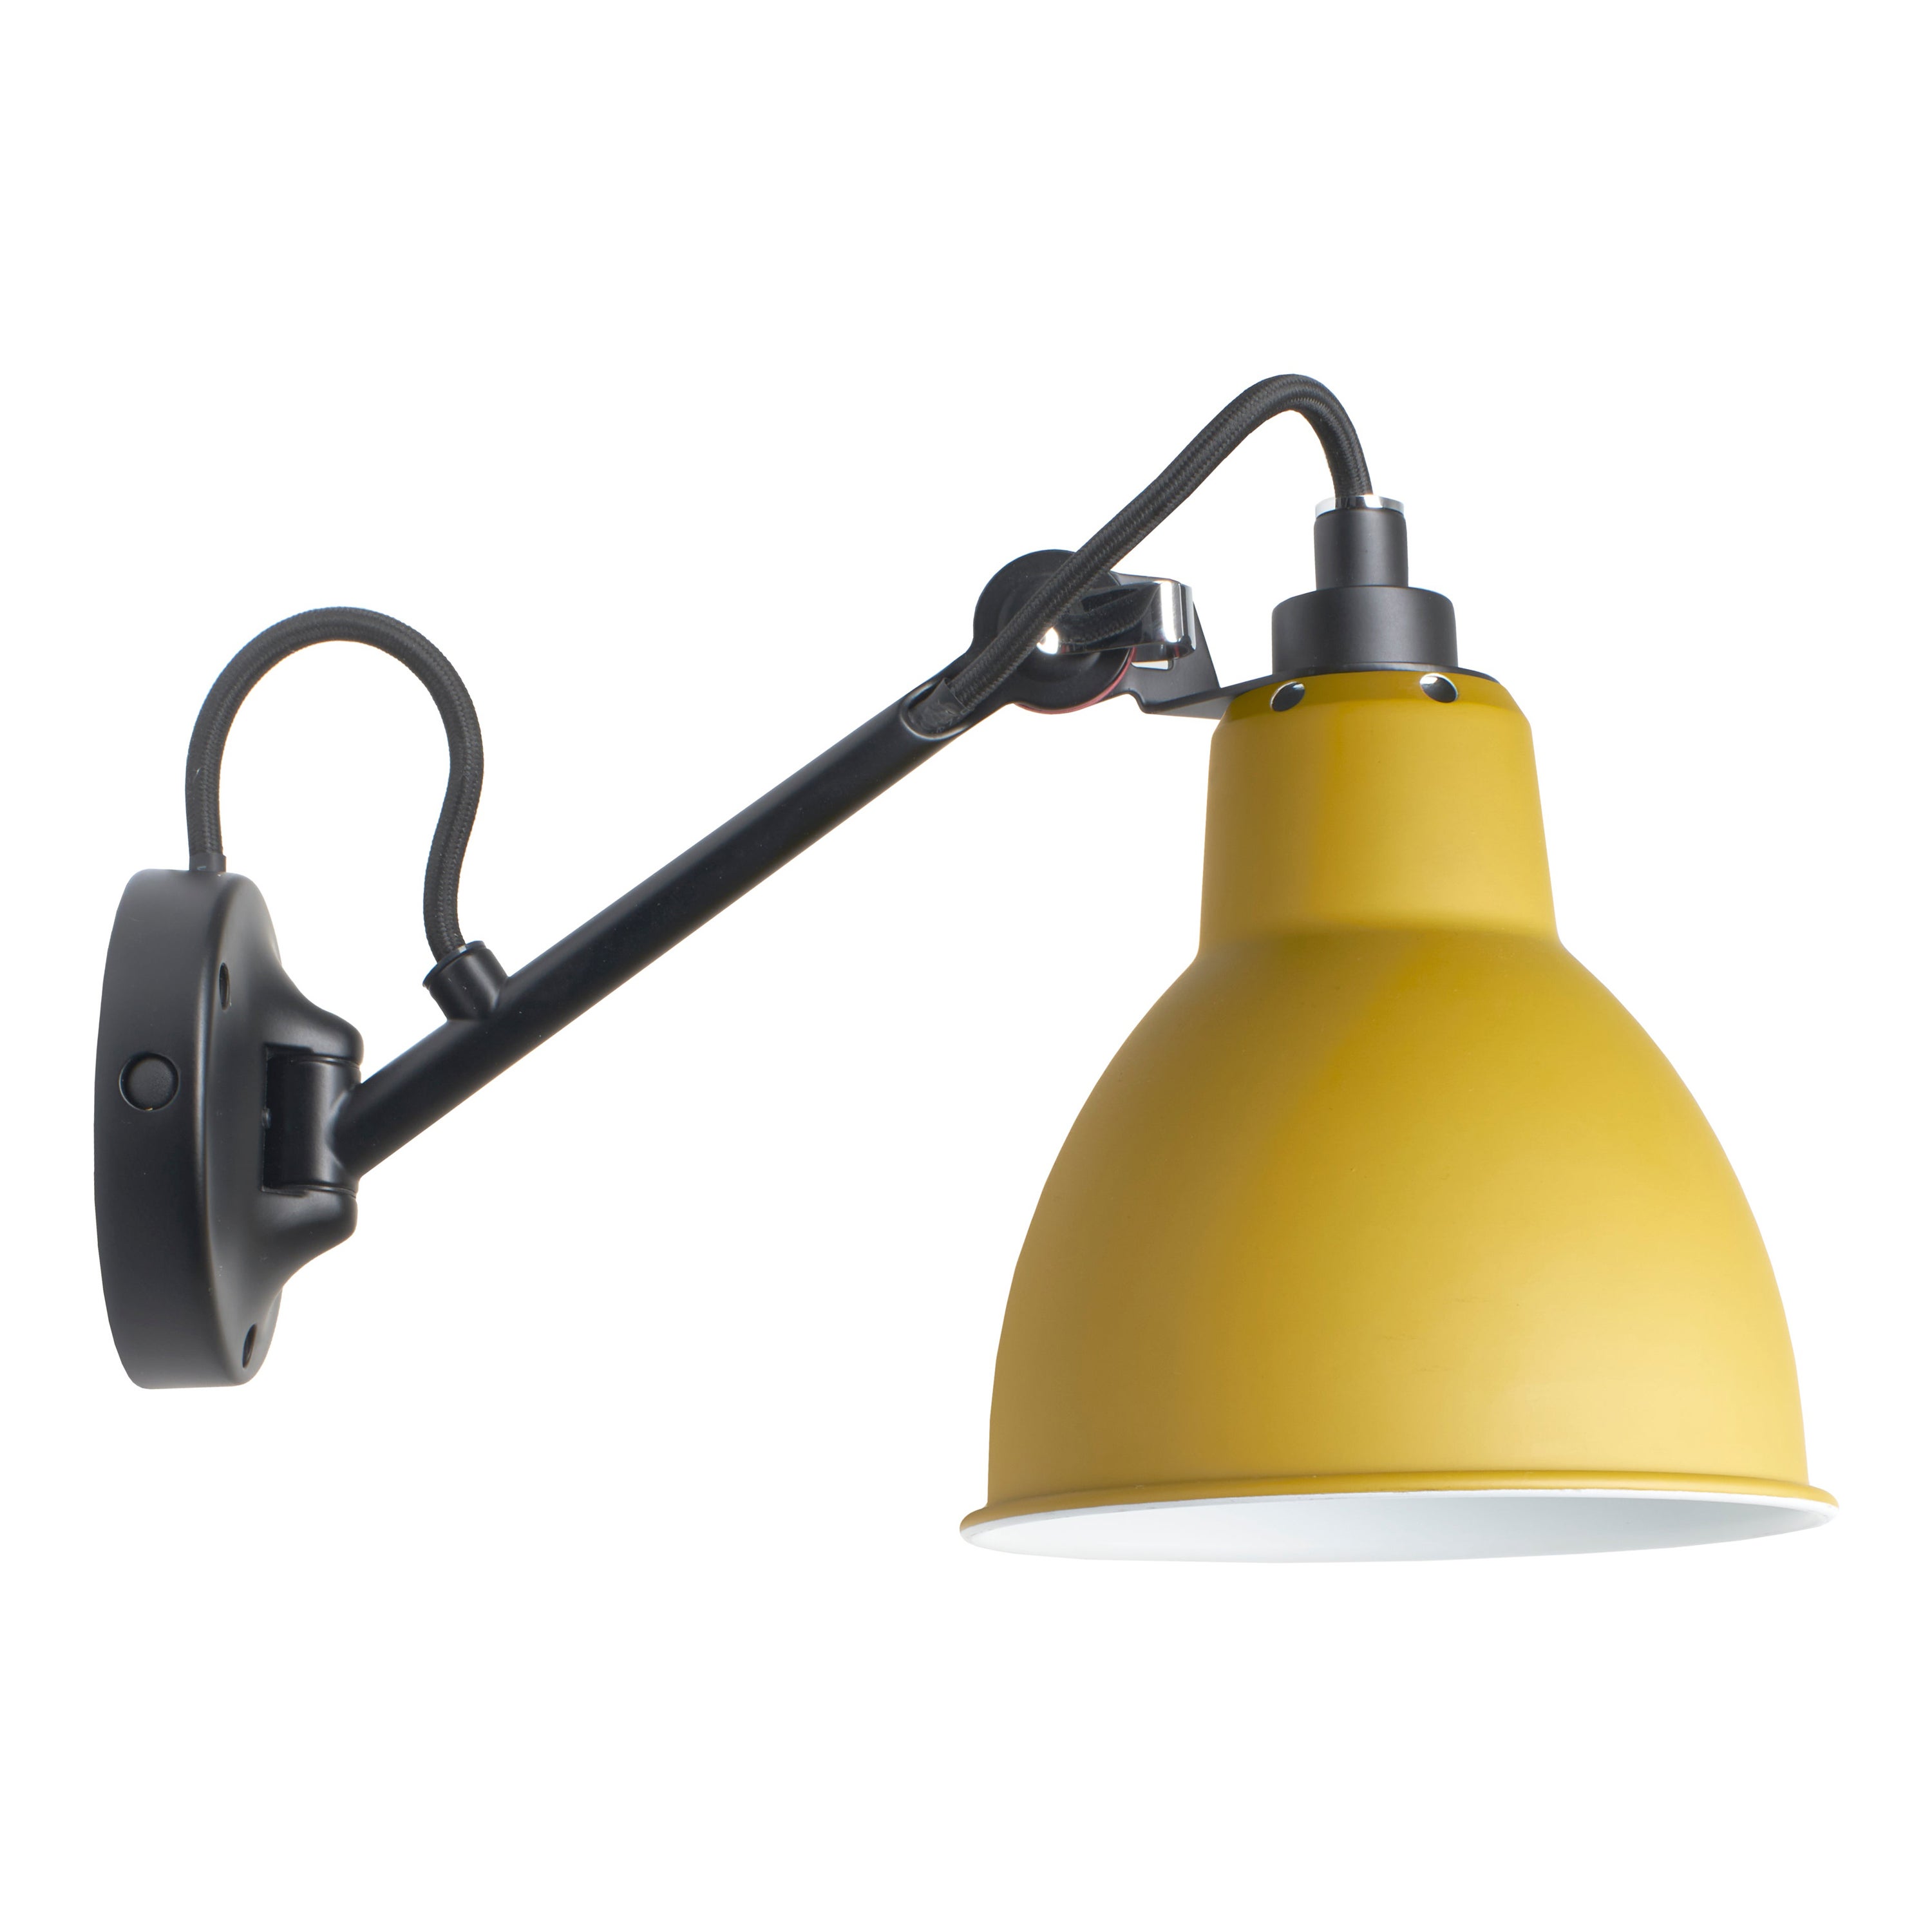 DCW Editions La Lampe Gras N°104 Wall Lamp in Black Arm and Yellow Shade For Sale